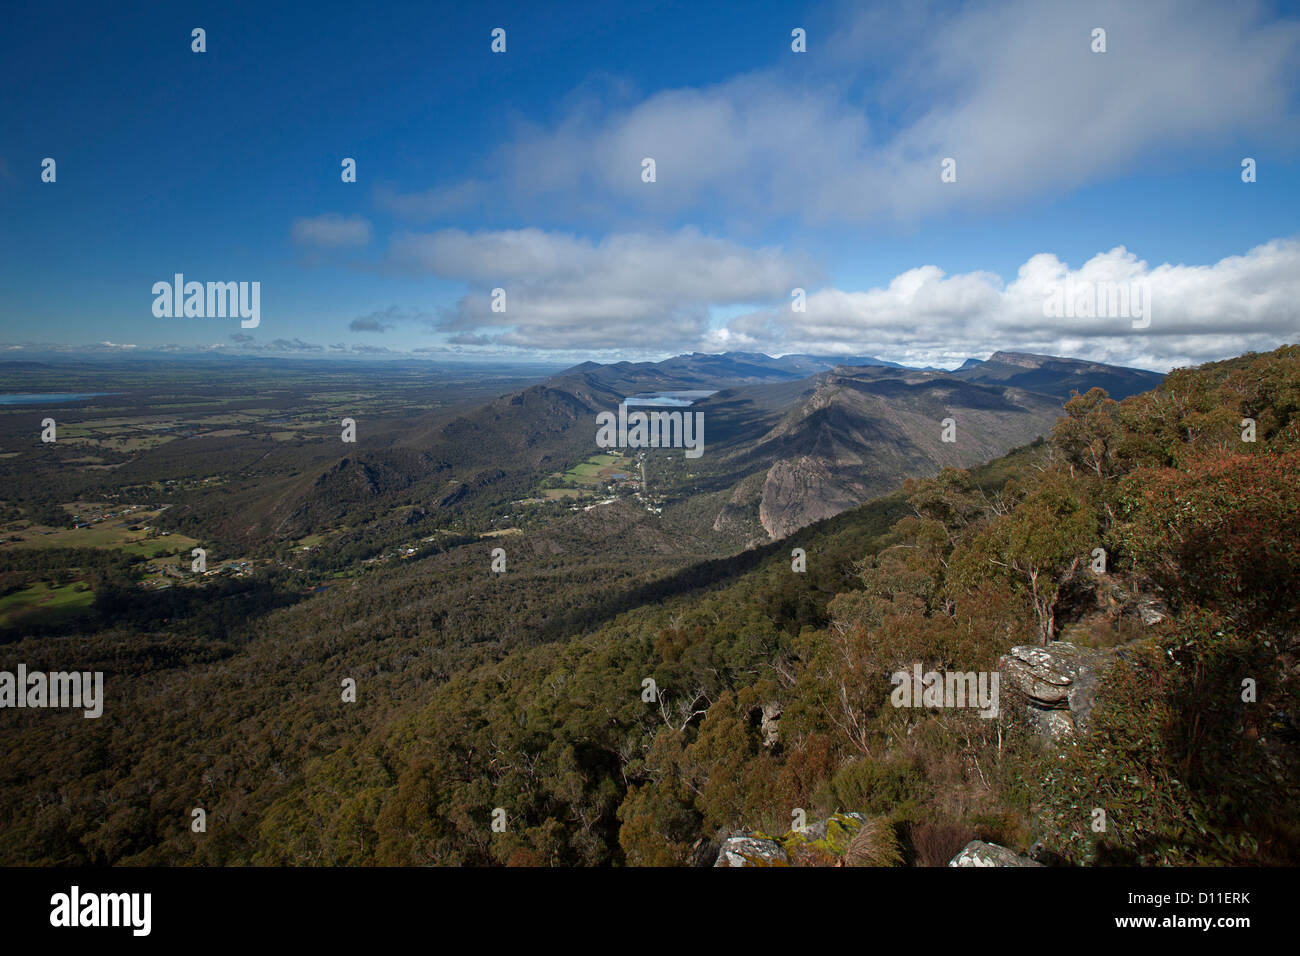 View of vast landscape of valleys and mountain ranges of Grampians National Park from Boroka lookout in Victoria Australia Stock Photo